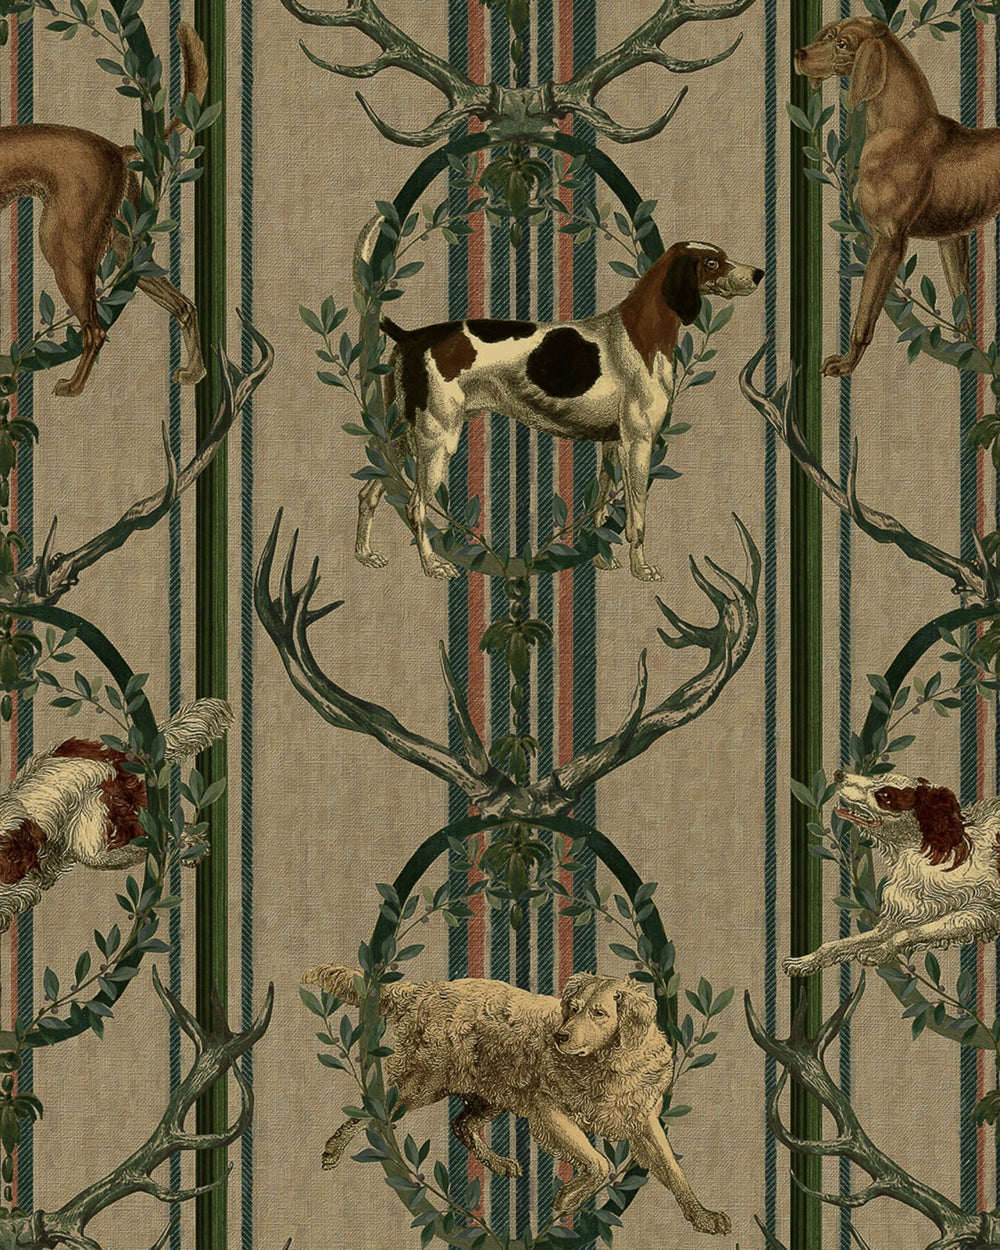 Mind-the-Gap-Tyrol-Collection-Mountain-Dogs-Wallpaper-Taupe-Antlers-wreaths-alpine-dogs-pattern-stripebackground-hunting-lodge-alpine-chalet-cabin-style-decor-textile-printed-huntMind-the-Gap-Tyrol-Collection-Mountain-Dogs-Wallpaper-Taupe-Antlers-wreaths-alpine-dogs-pattern-stripebackground-hunting-lodge-alpine-chalet-cabin-style-decor-textile-printed-hunt